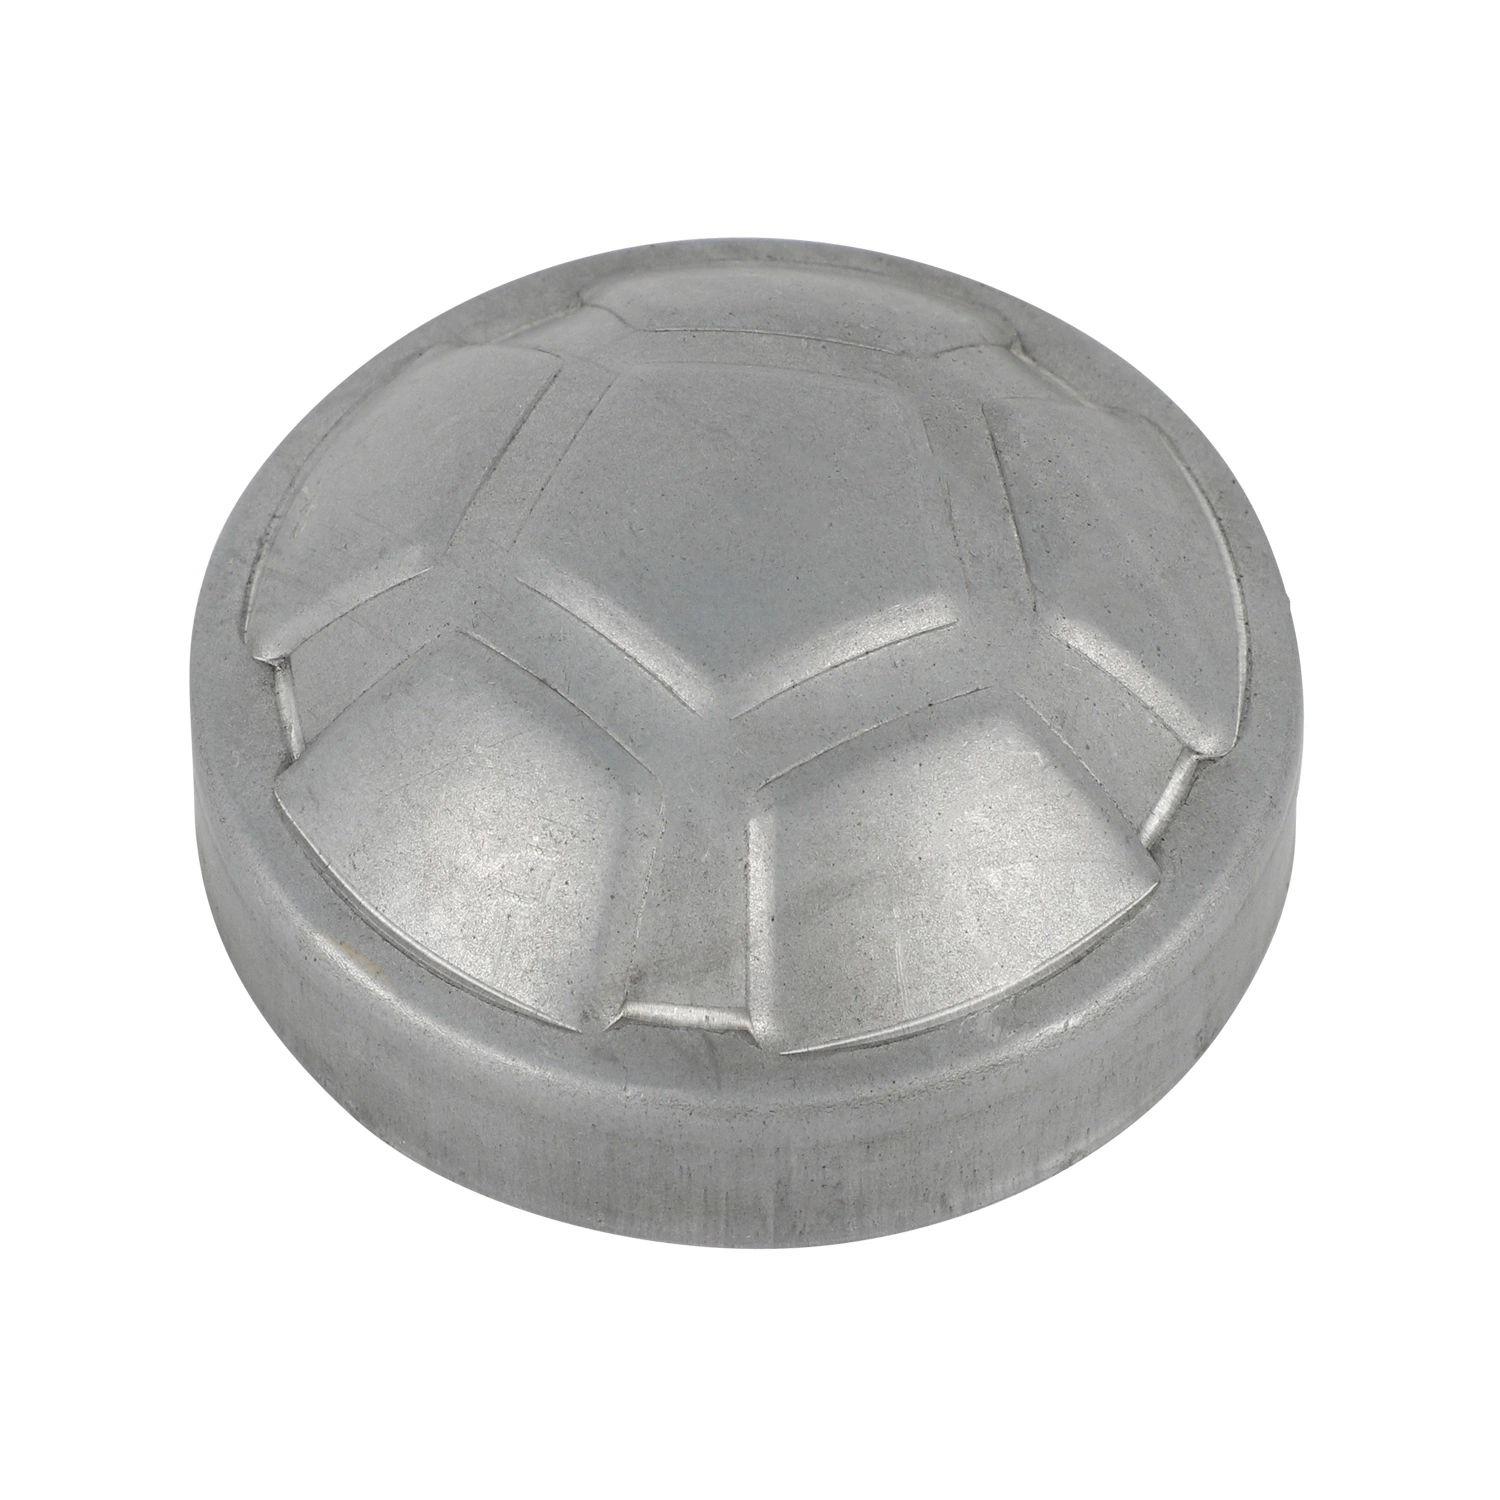 Wholesale/Supplier High quality/High cost performance  Customized Decorative Square Metal Fence Post Top Caps